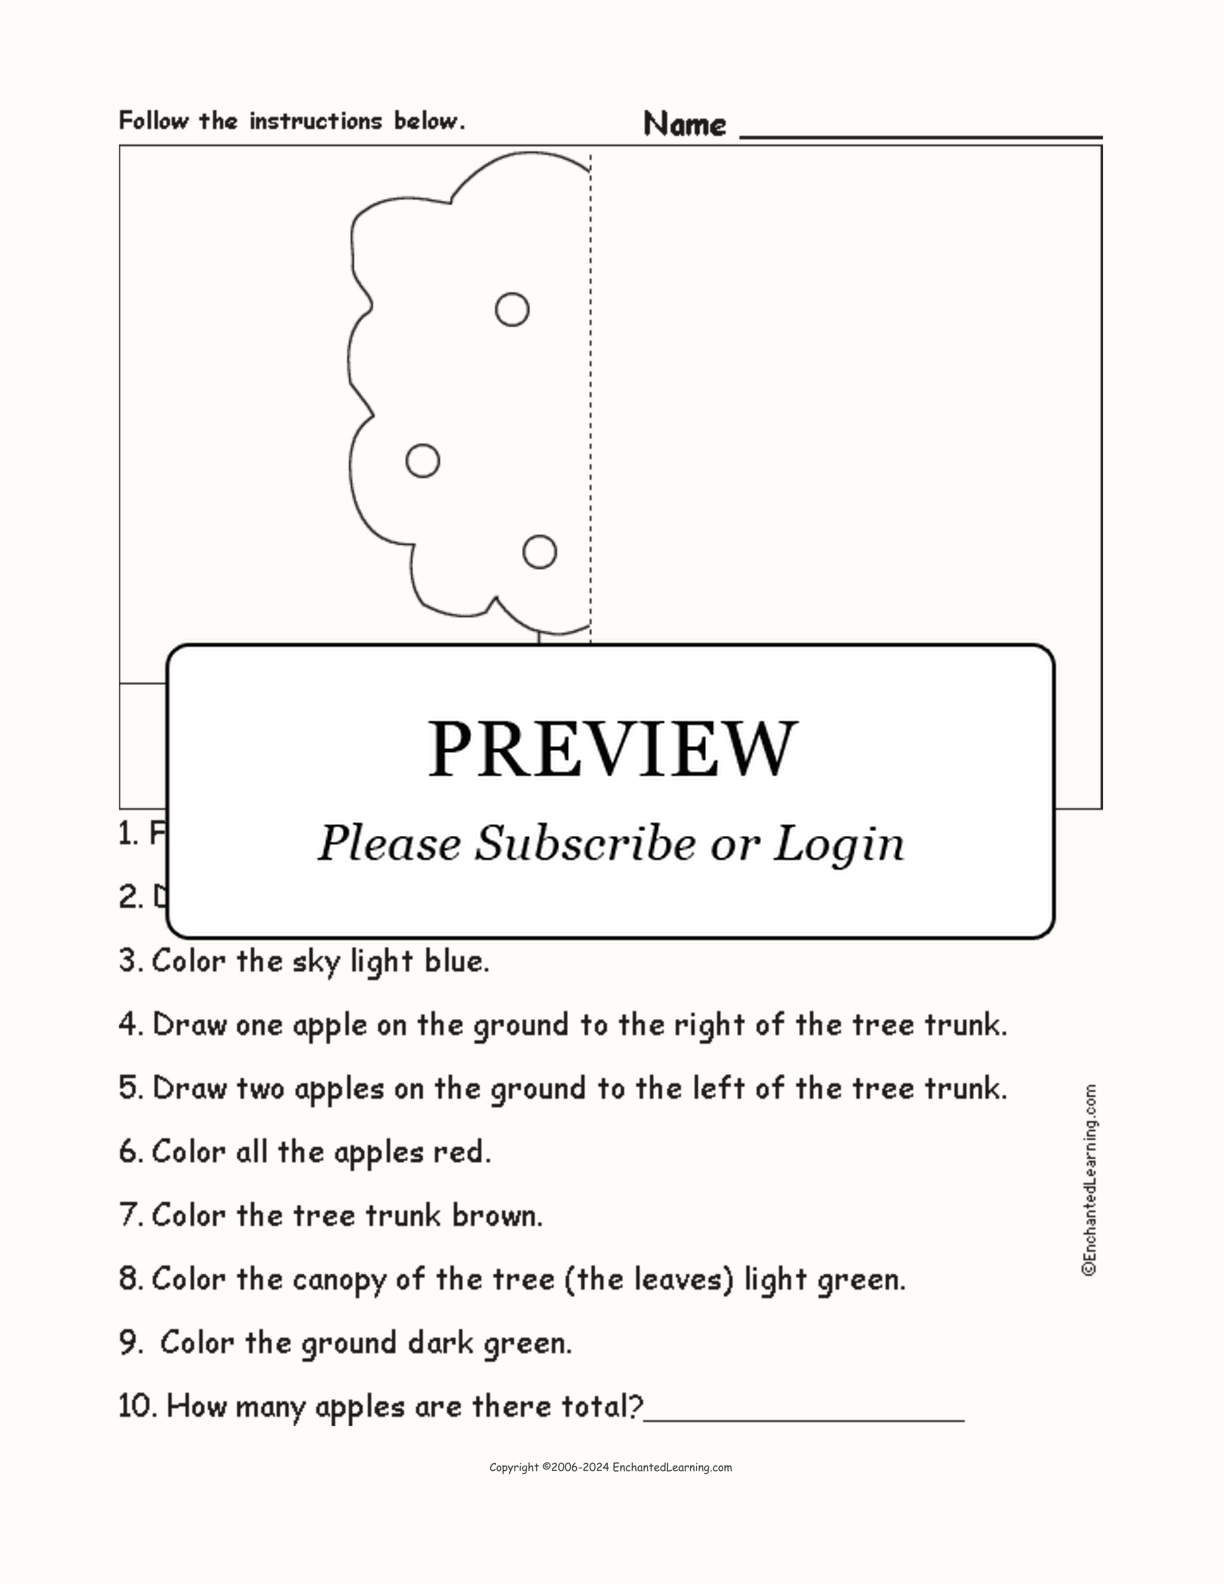 Apple Tree - Follow the Instructions interactive worksheet page 1